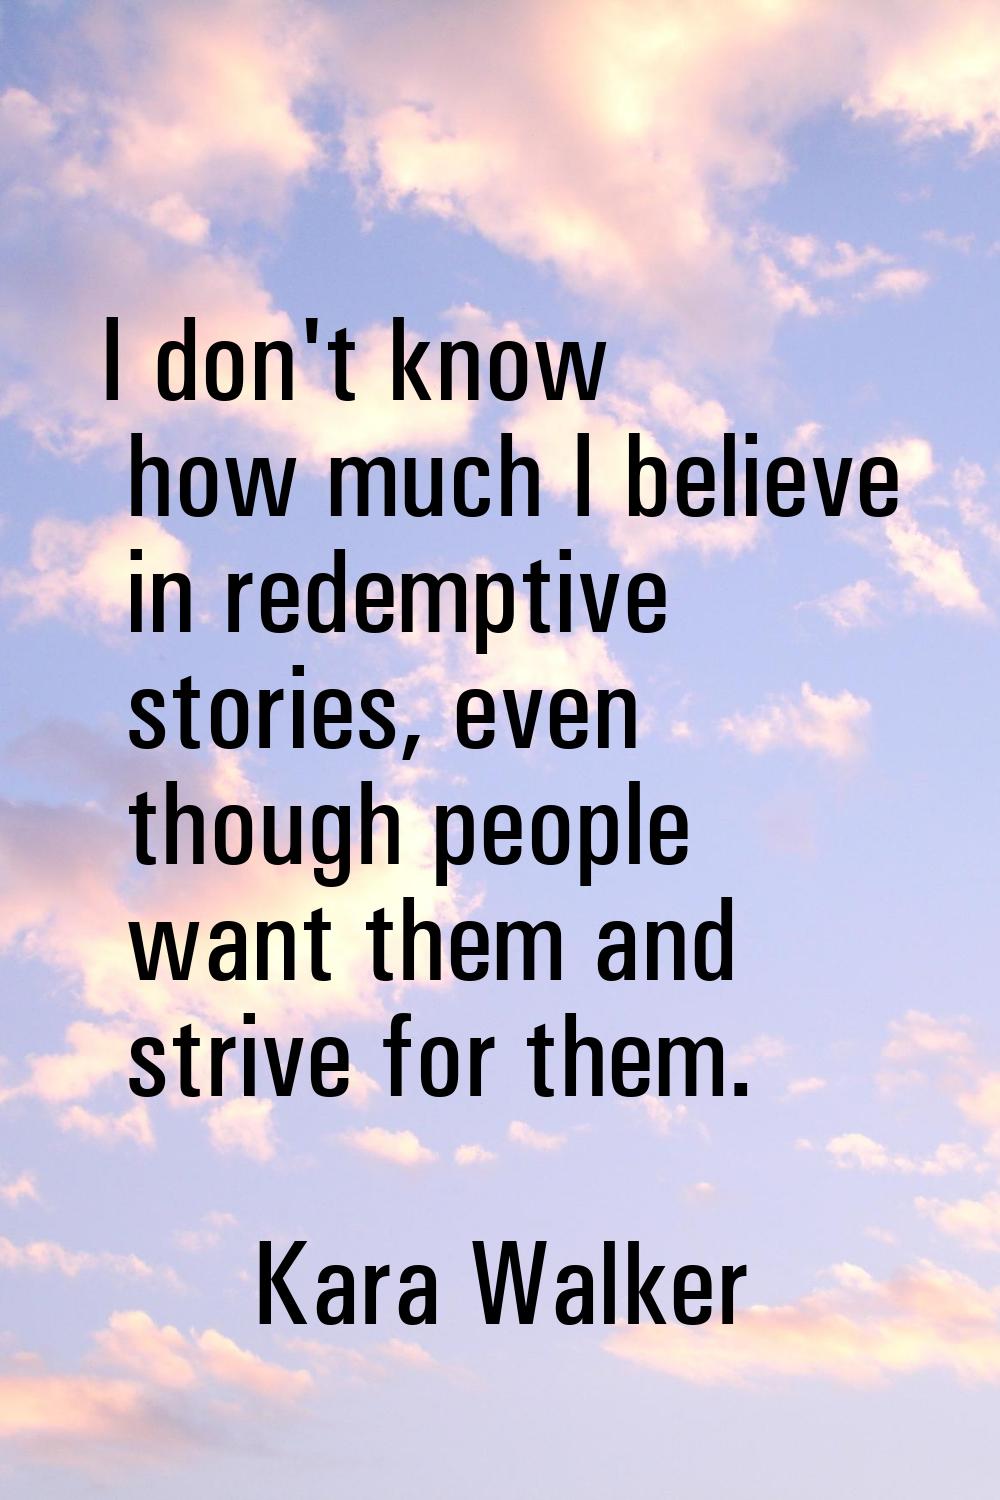 I don't know how much I believe in redemptive stories, even though people want them and strive for 